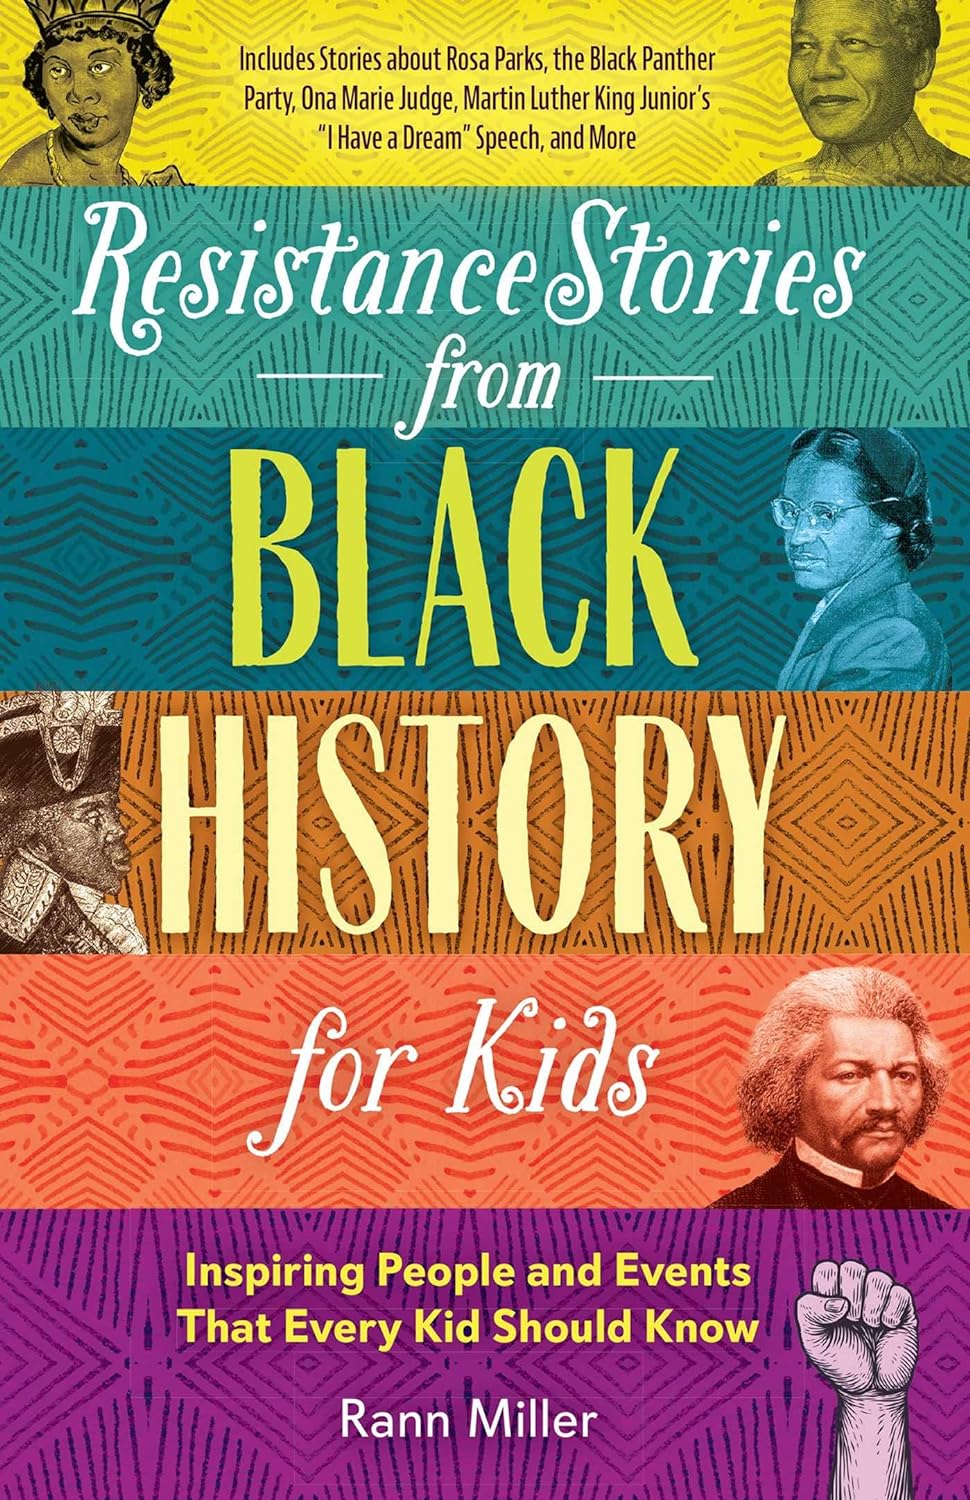 Image for "Resistance Stories from Black History for Kids"